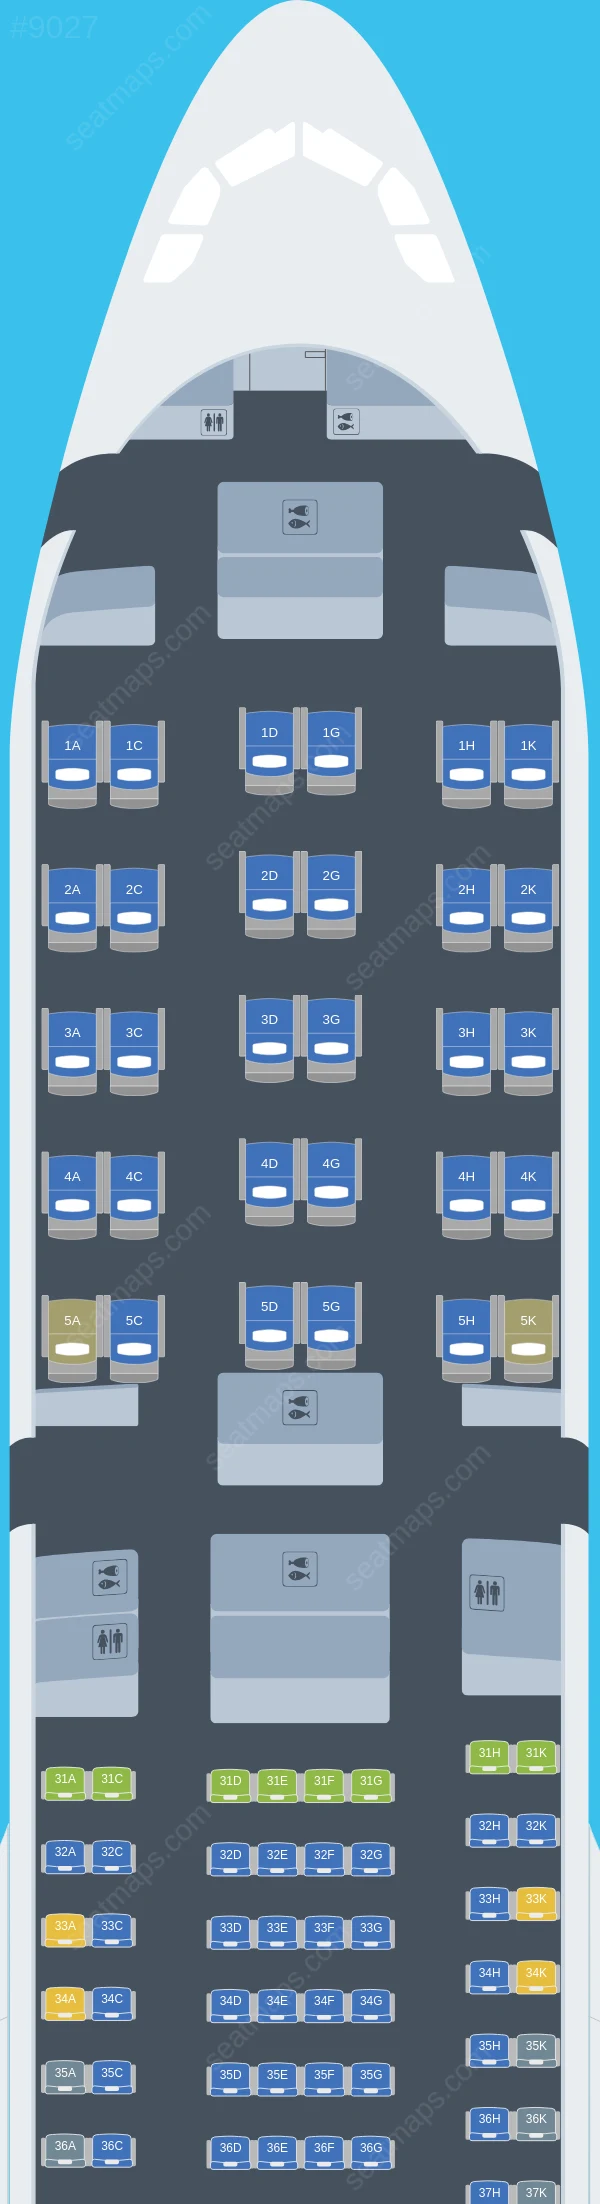 China Southern Airbus A330-300 V.1 seatmap preview